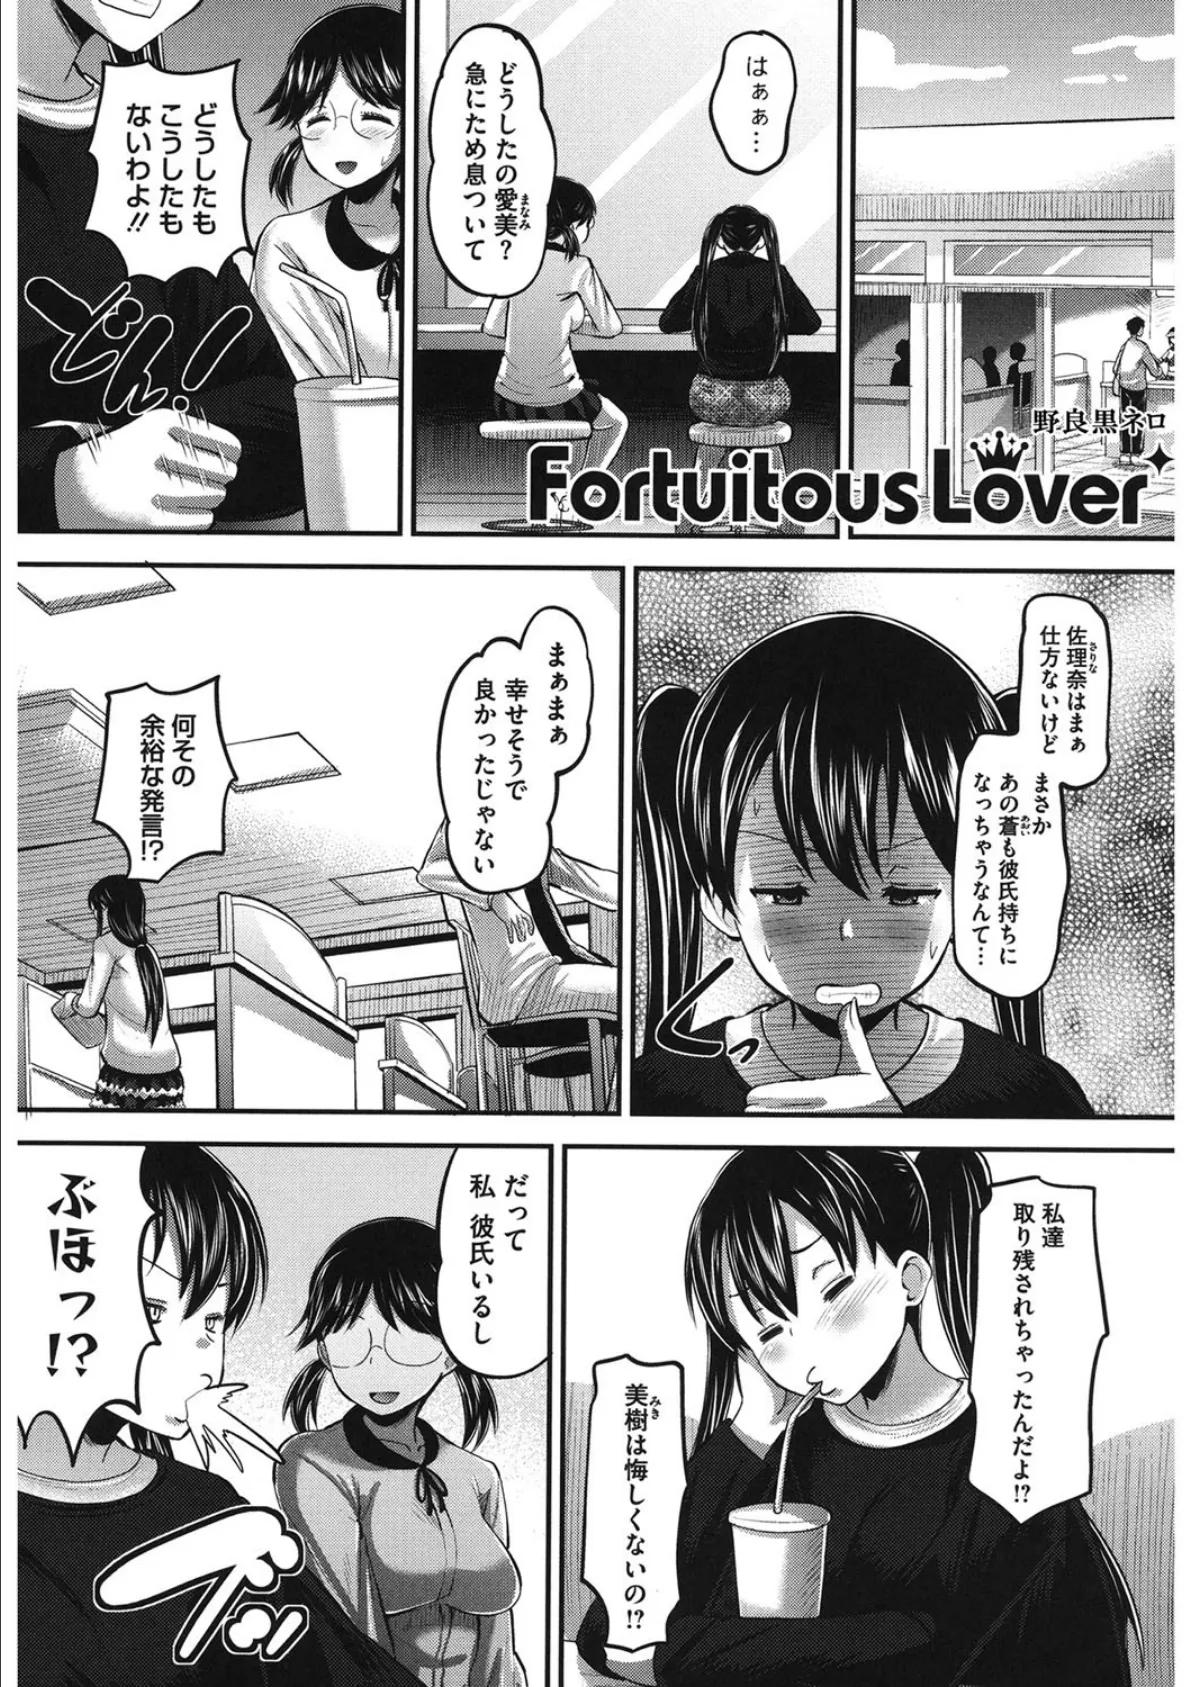 Fortuitous Lover 1ページ